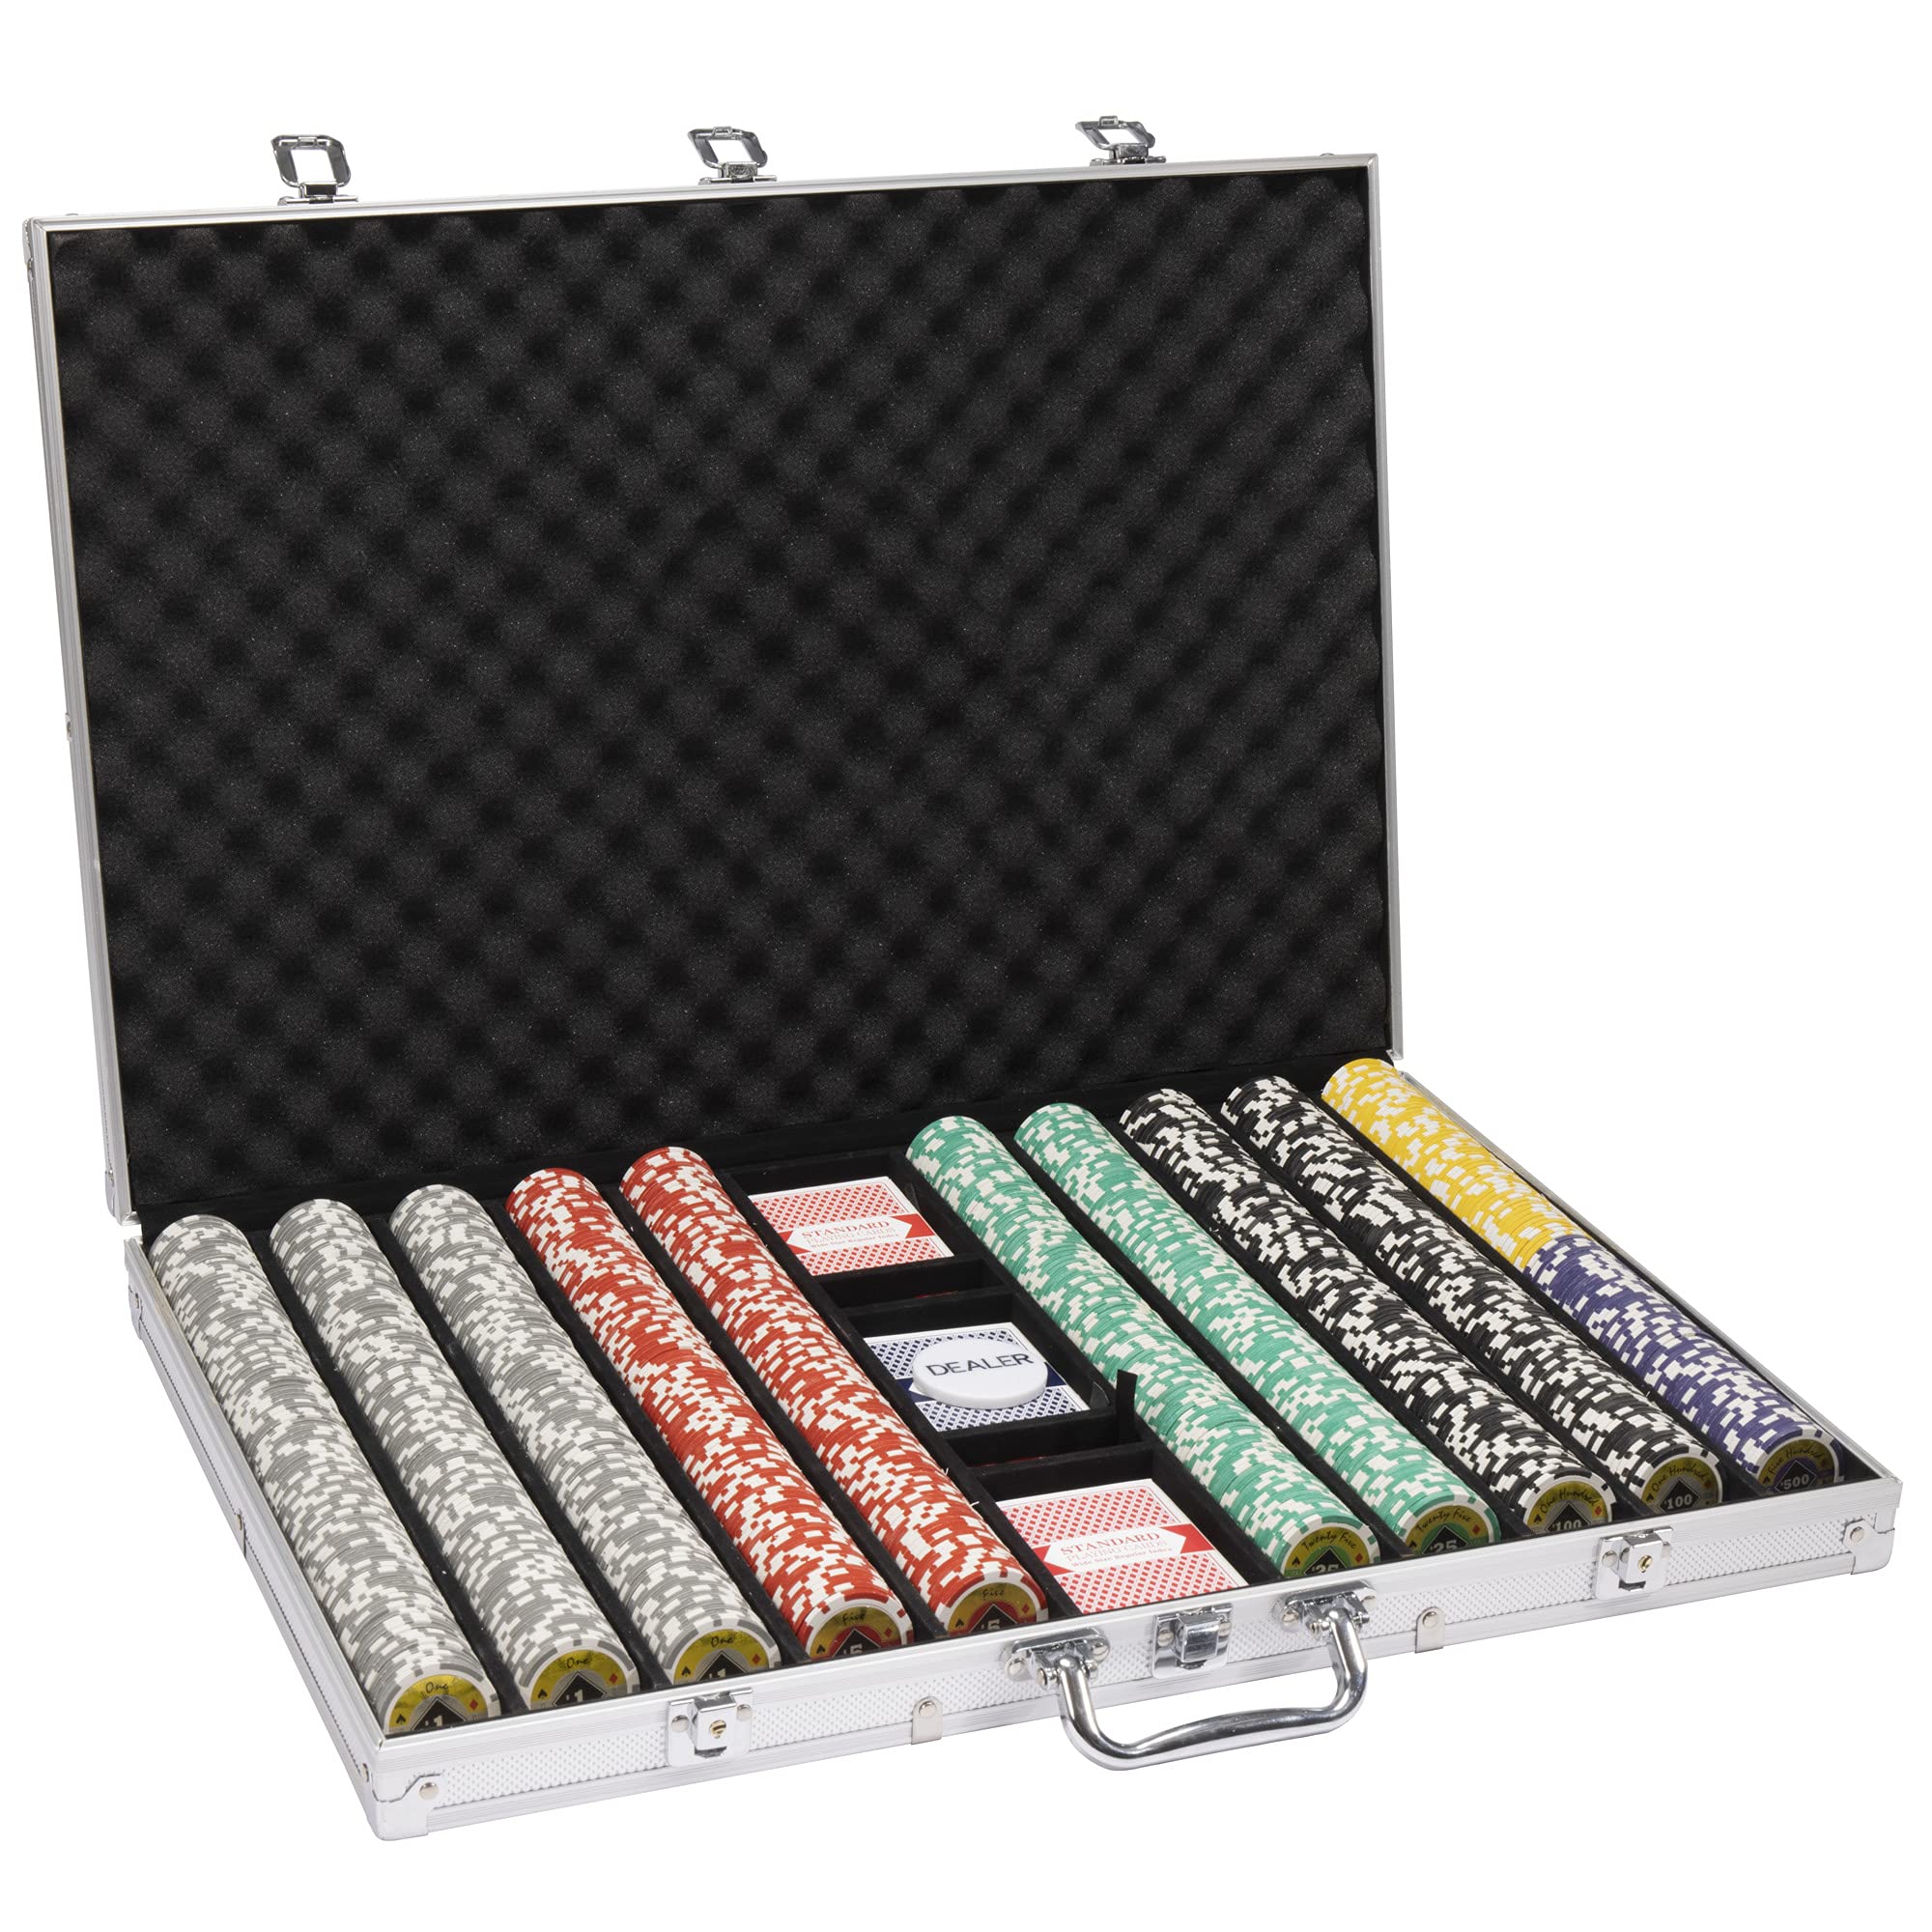 Black Diamond 14-gram Holo Inlay Poker Chip Set in Aluminum Case (1000 Count) - Clay Composite